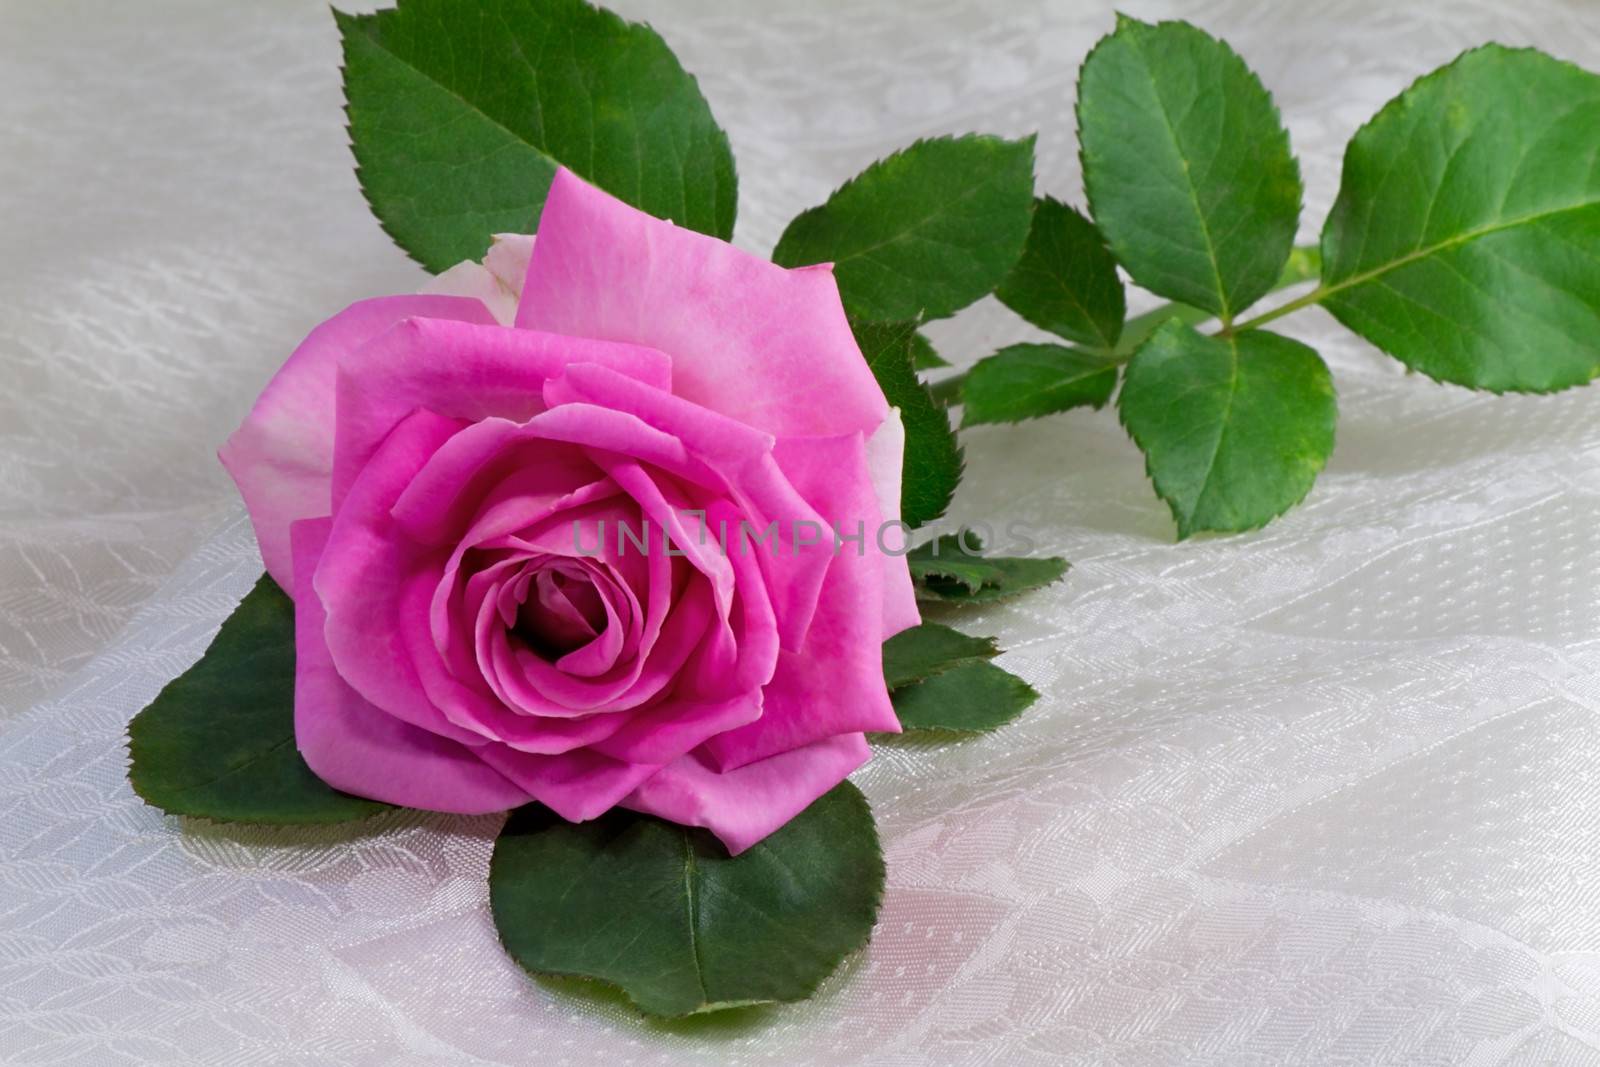 Big bright-pink rose garden with leaves lying on a white silk veil.